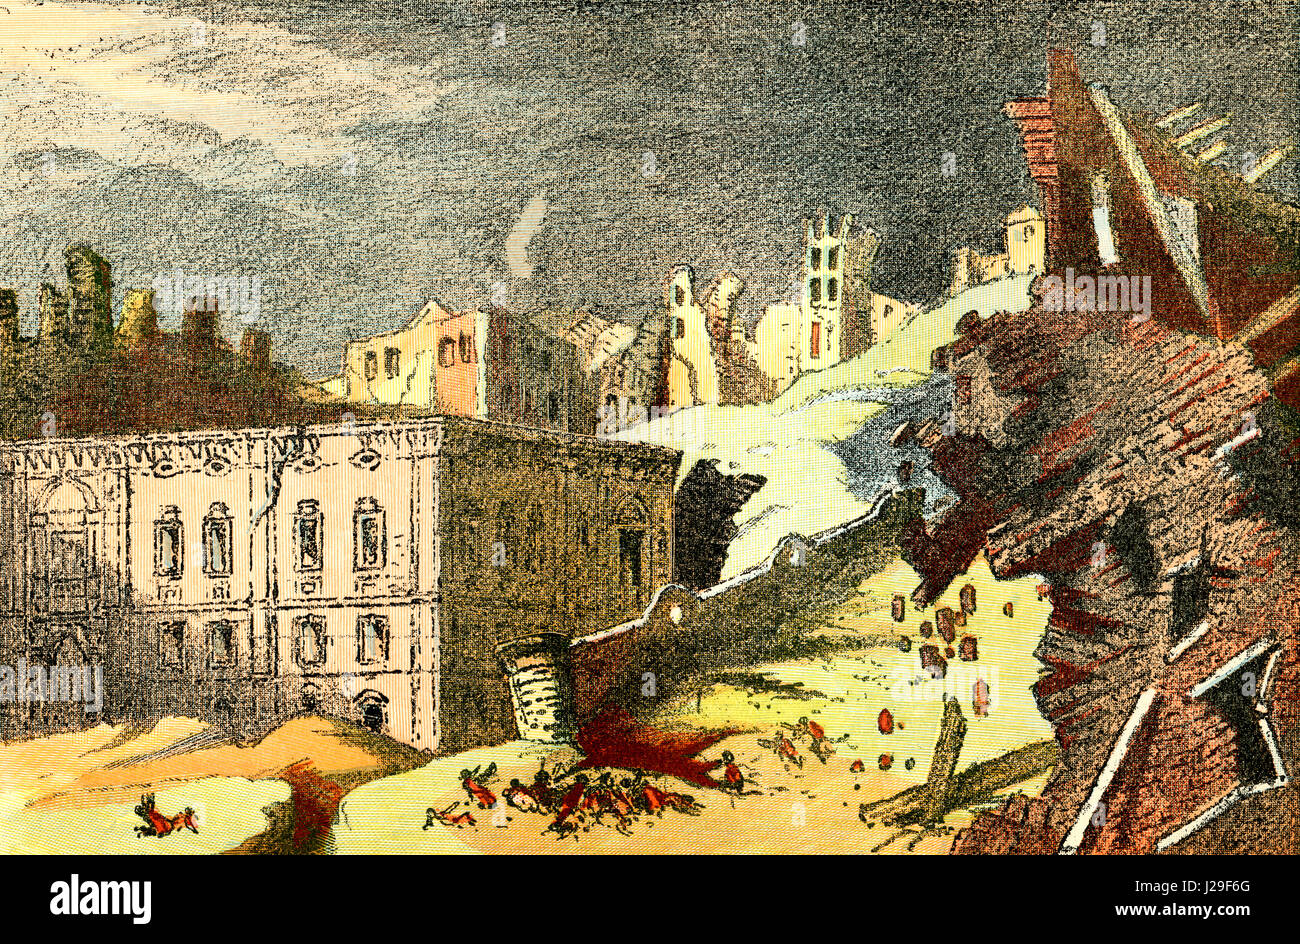 The earthquake at Lisbon, Portugal in 1755, aka Great Lisbon earthquake which caused fires and a subsequent Tsunami.   From The World's Foundations or Geology for Beginners, published 1883. Stock Photo